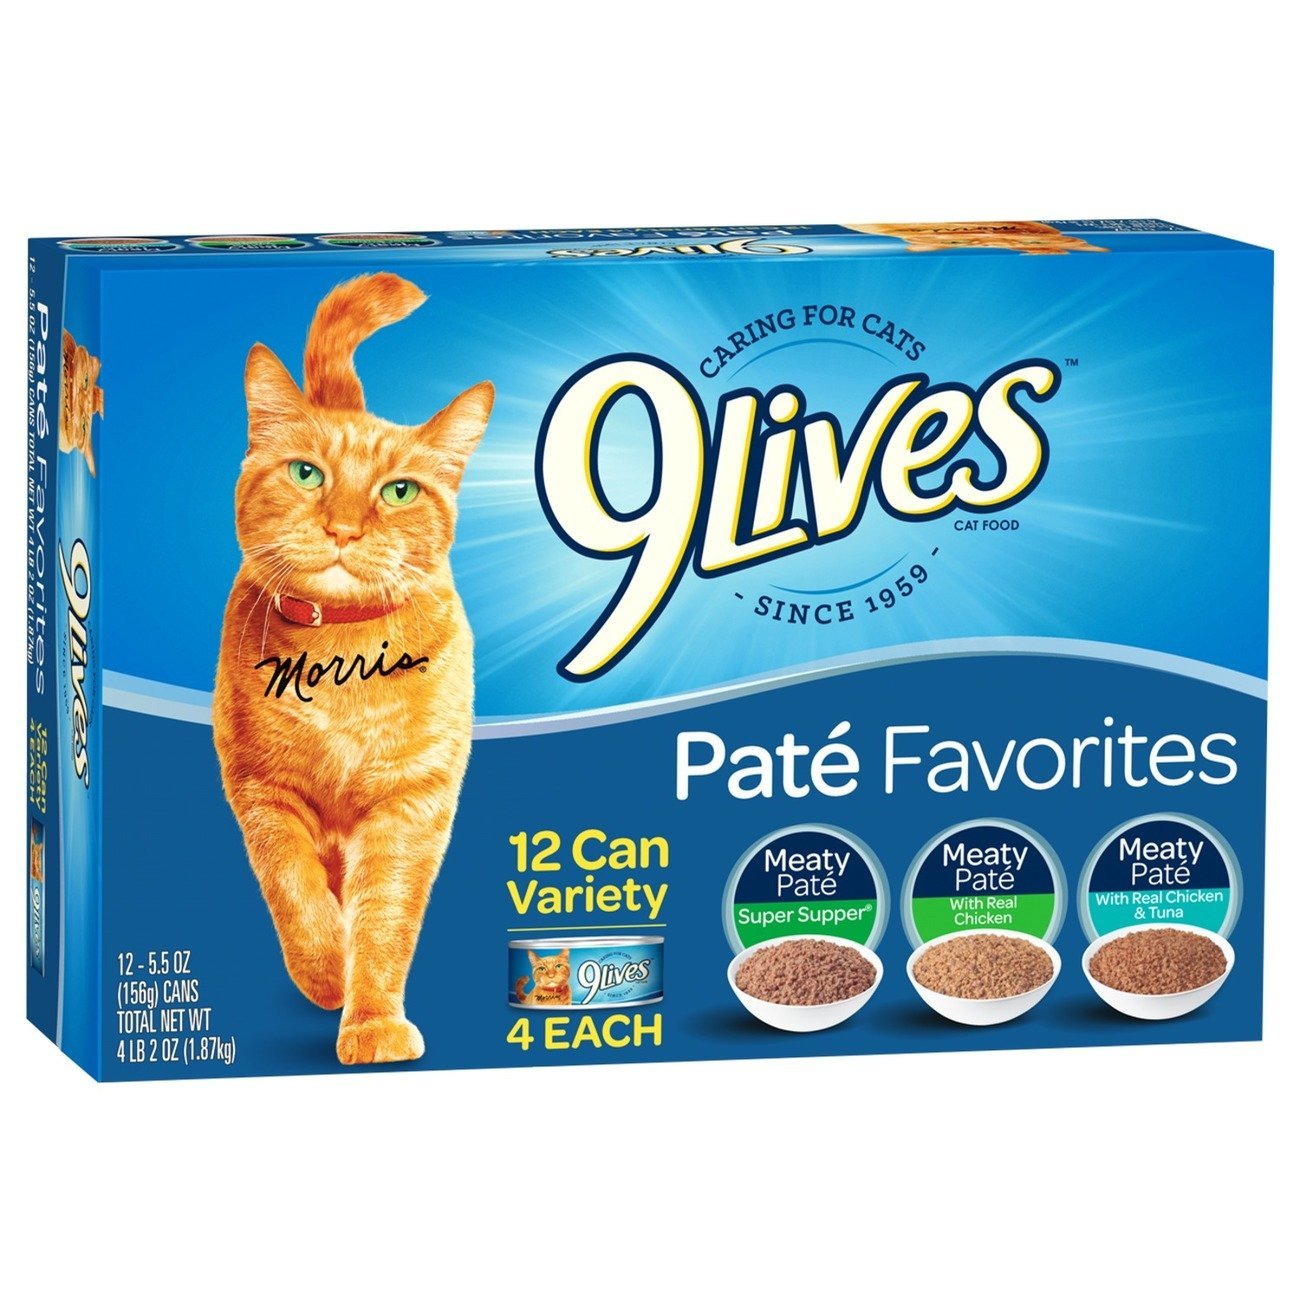 9-lives-pate-favorites-variety-pack-canned-cat-food-pack-of-12-cans-3-99